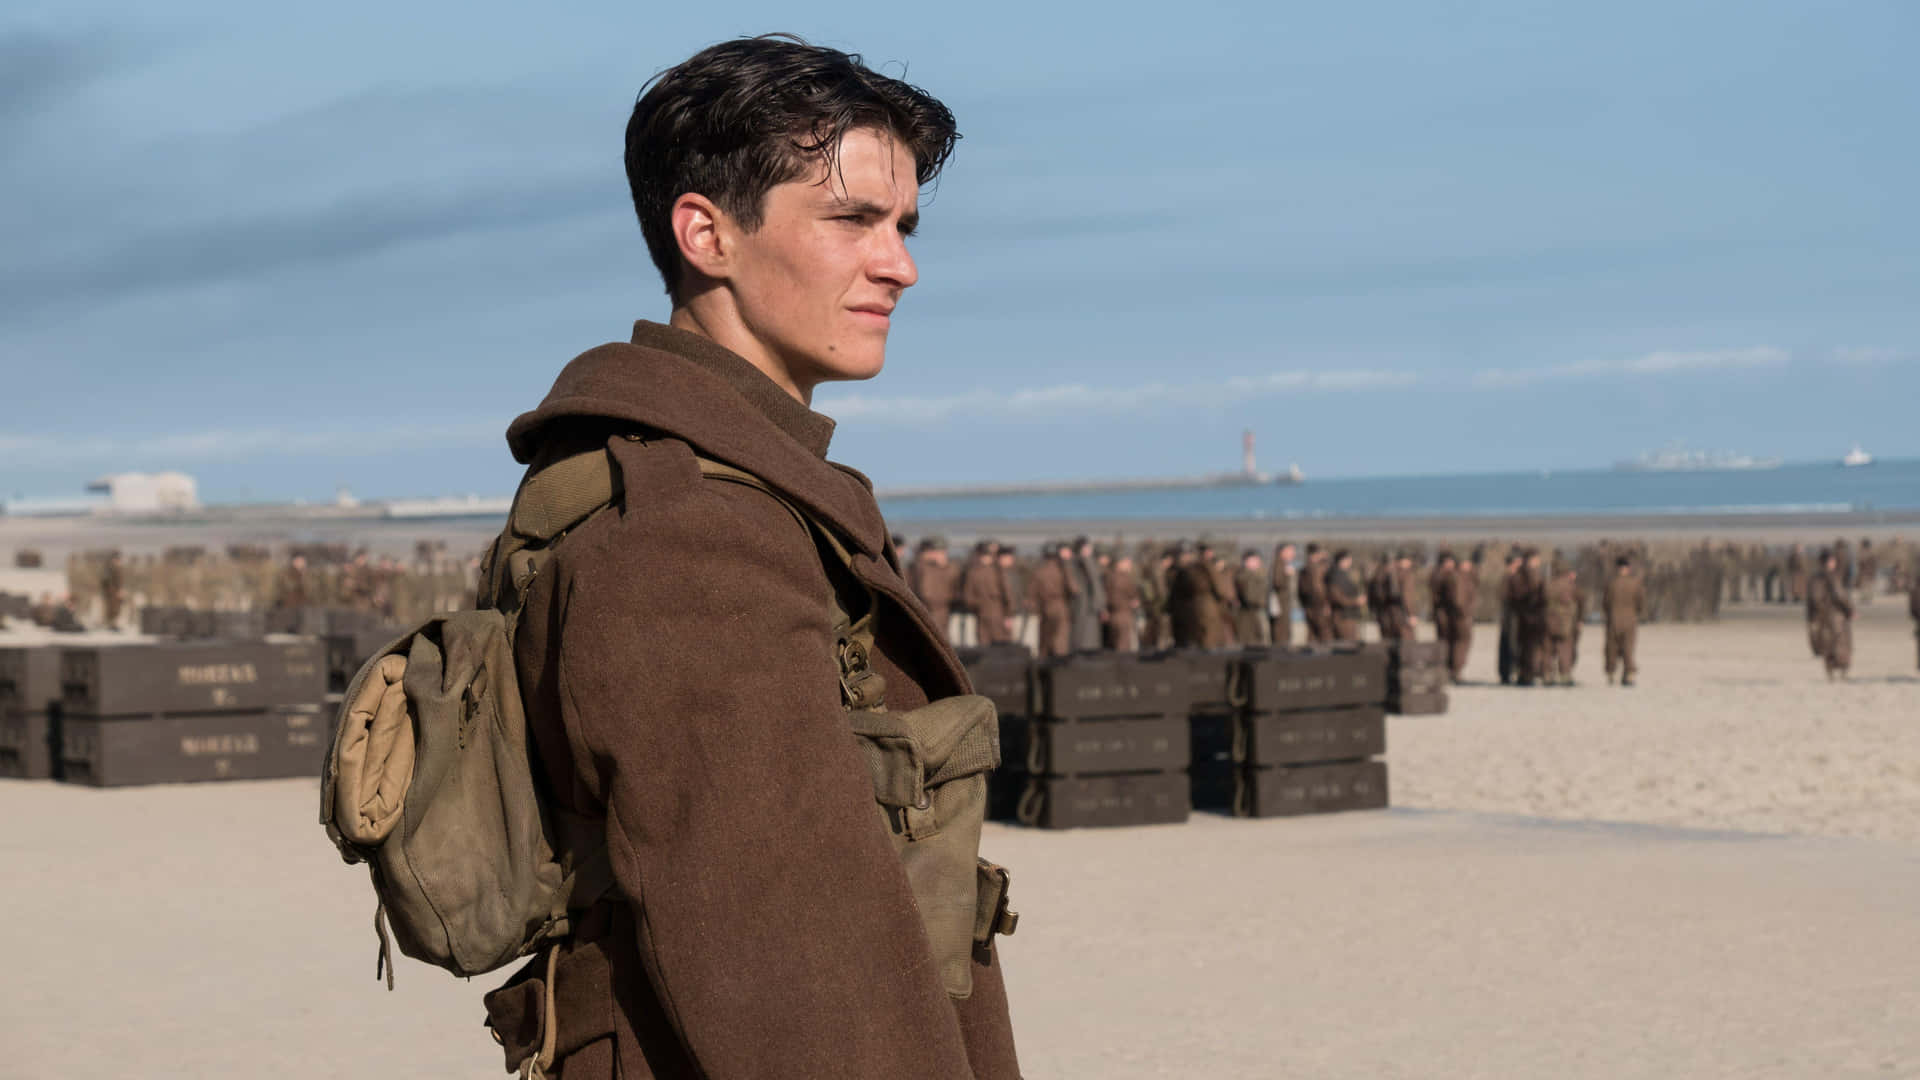 Download Dunkirk wallpapers for mobile phone free Dunkirk HD pictures